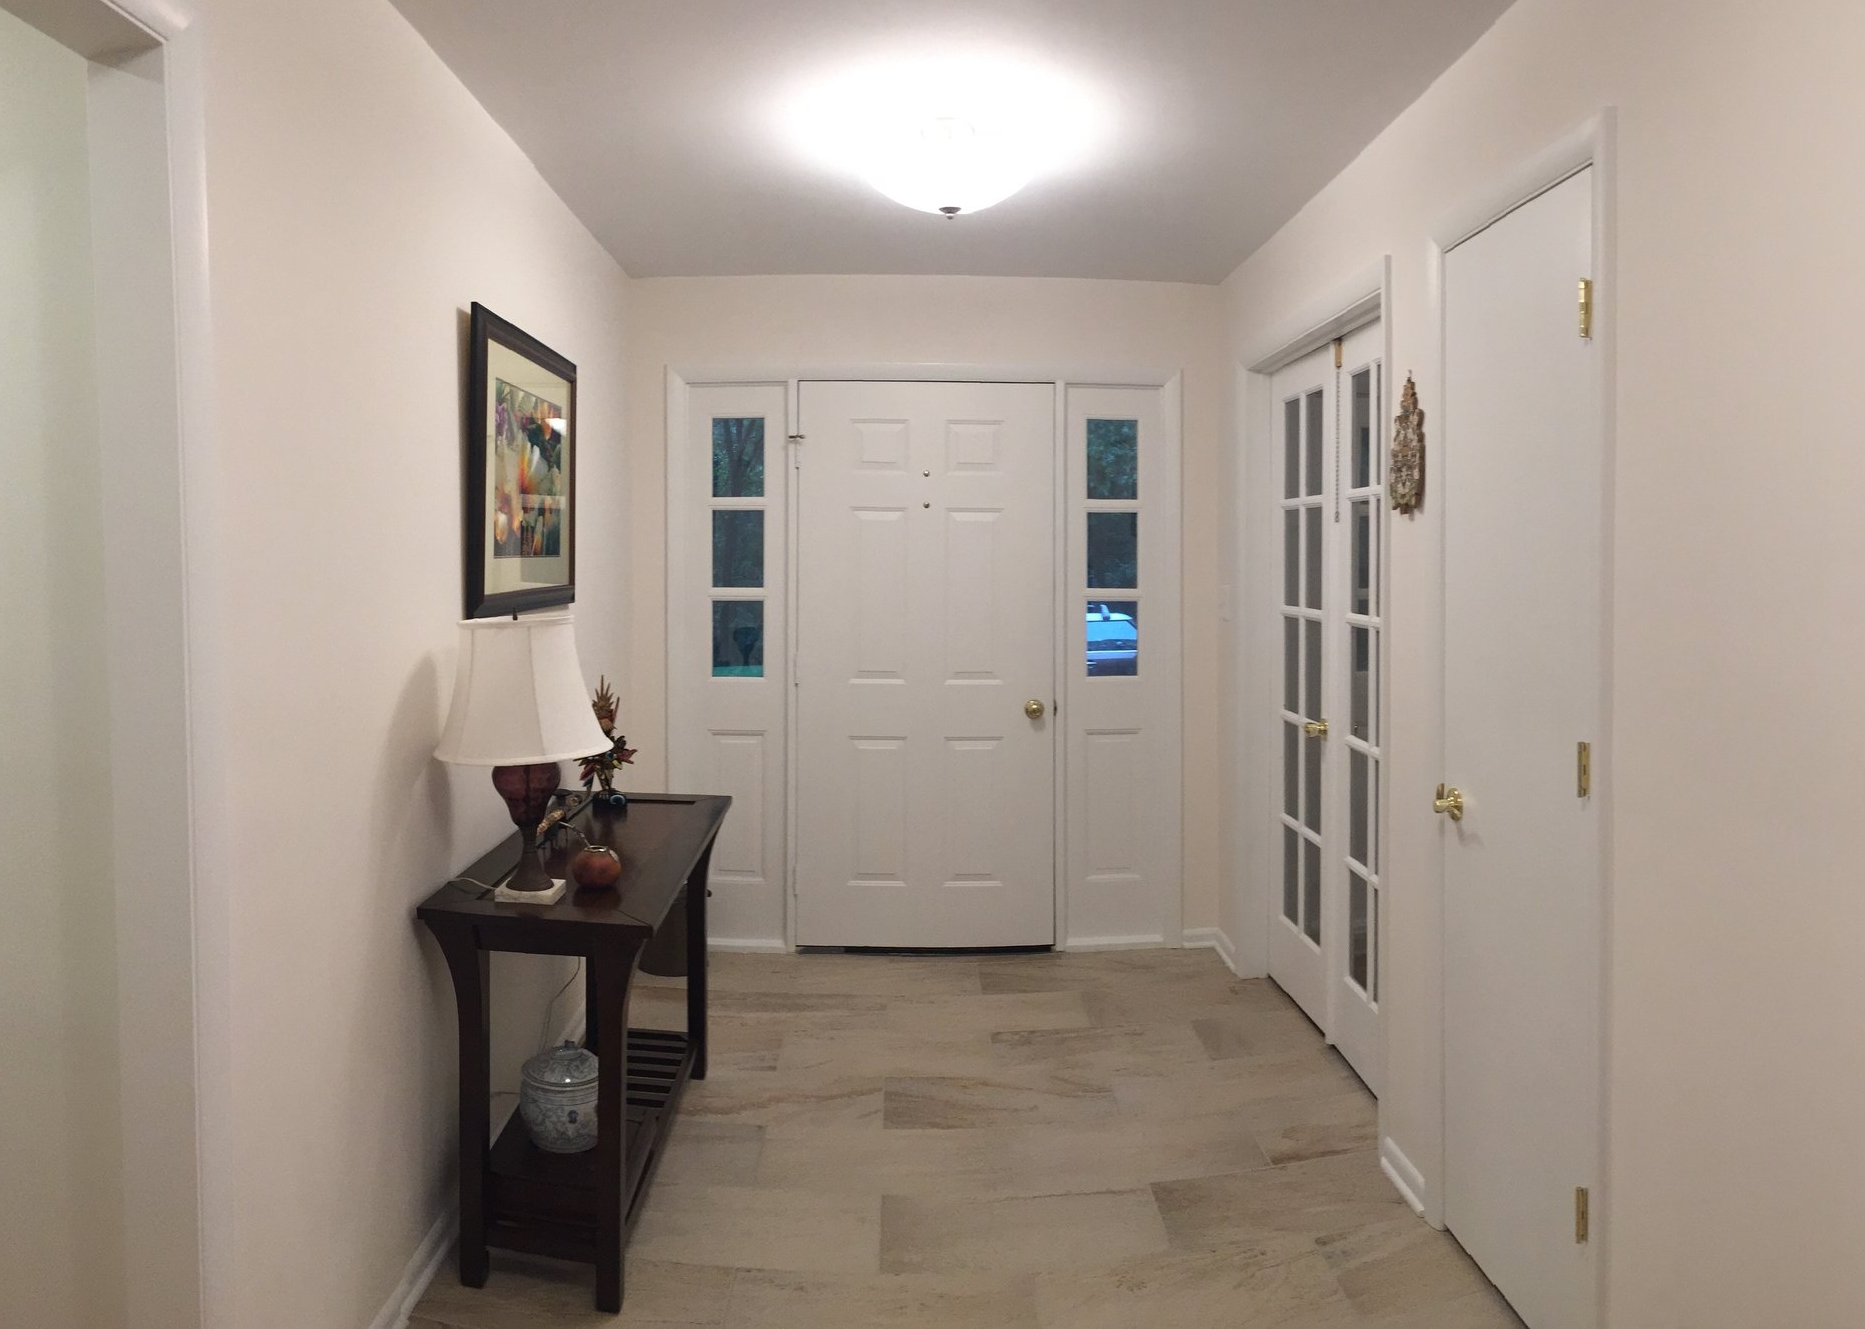  After, the coat closet and wall were removed for an open flow between the Foyer and the rest of the house.&nbsp; A new coat closet next to the double French doors was carved out of a corner of the Family Room.&nbsp; The French doors were also rehung